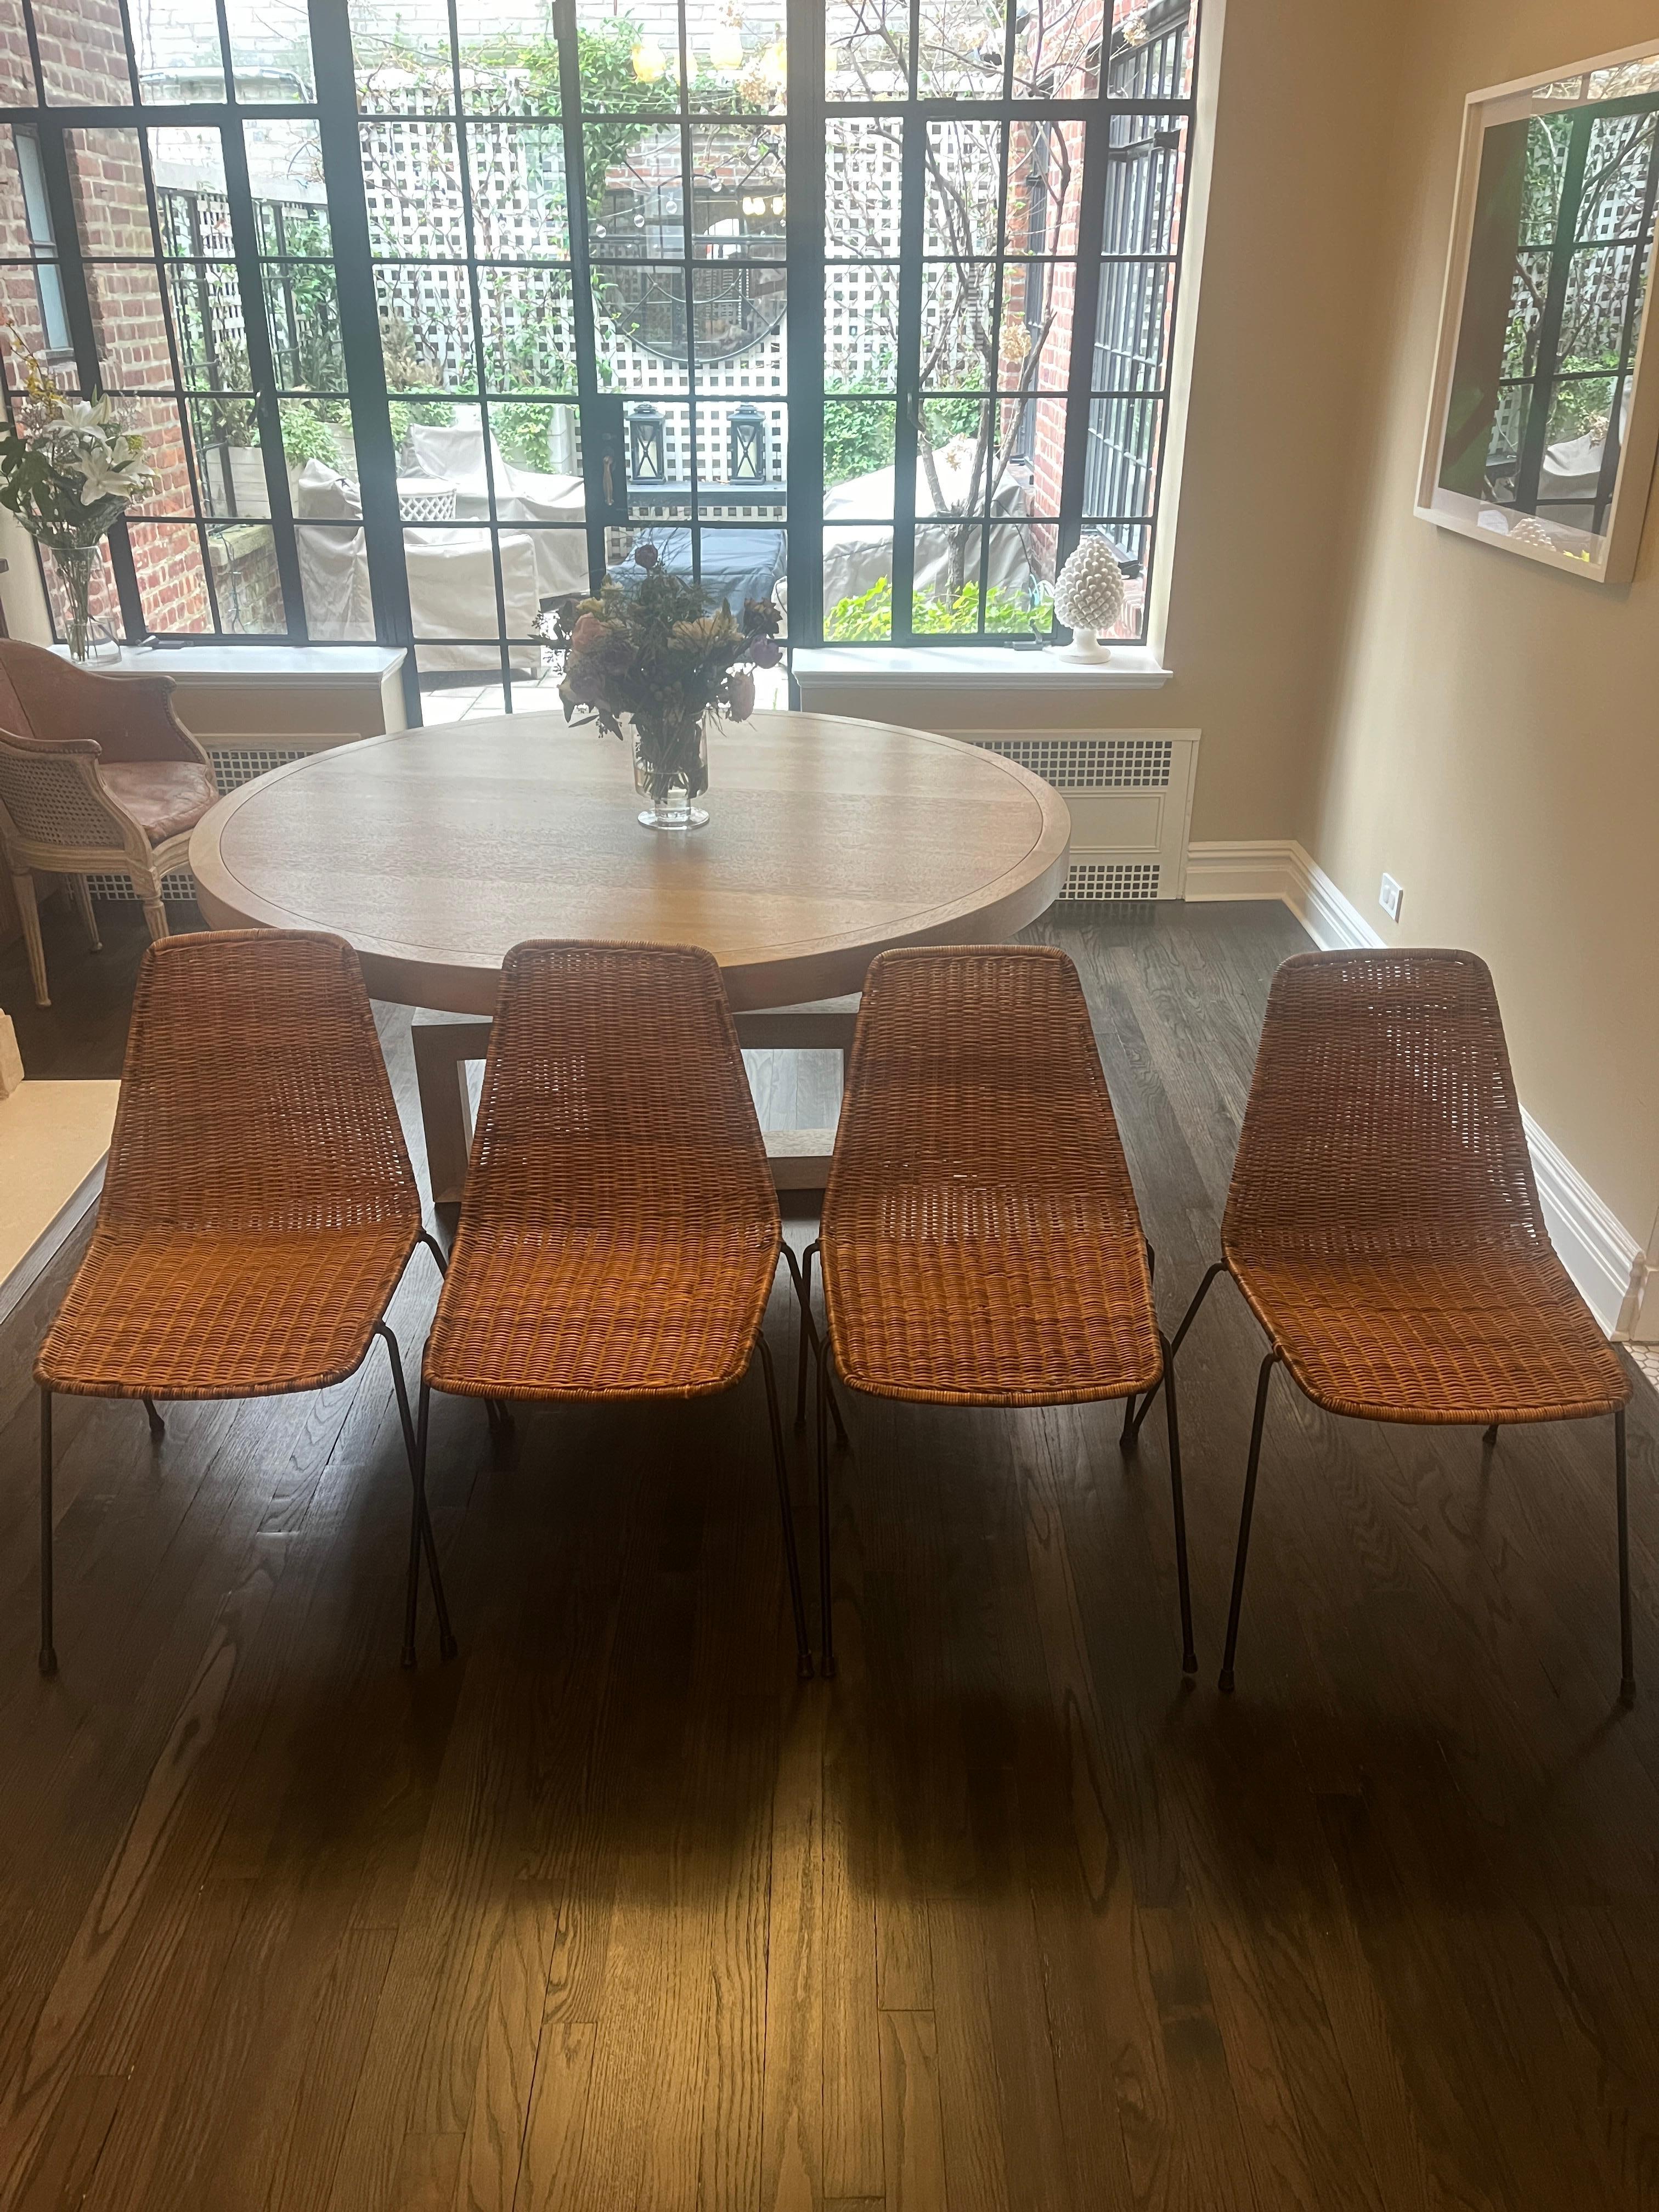 Set of four (4) midcentury Italian wicker and iron dining chairs by Gian Franco Legler, 1960s. Minimalist silhouette, full wicker seat and back on thin iron splayed legs. 